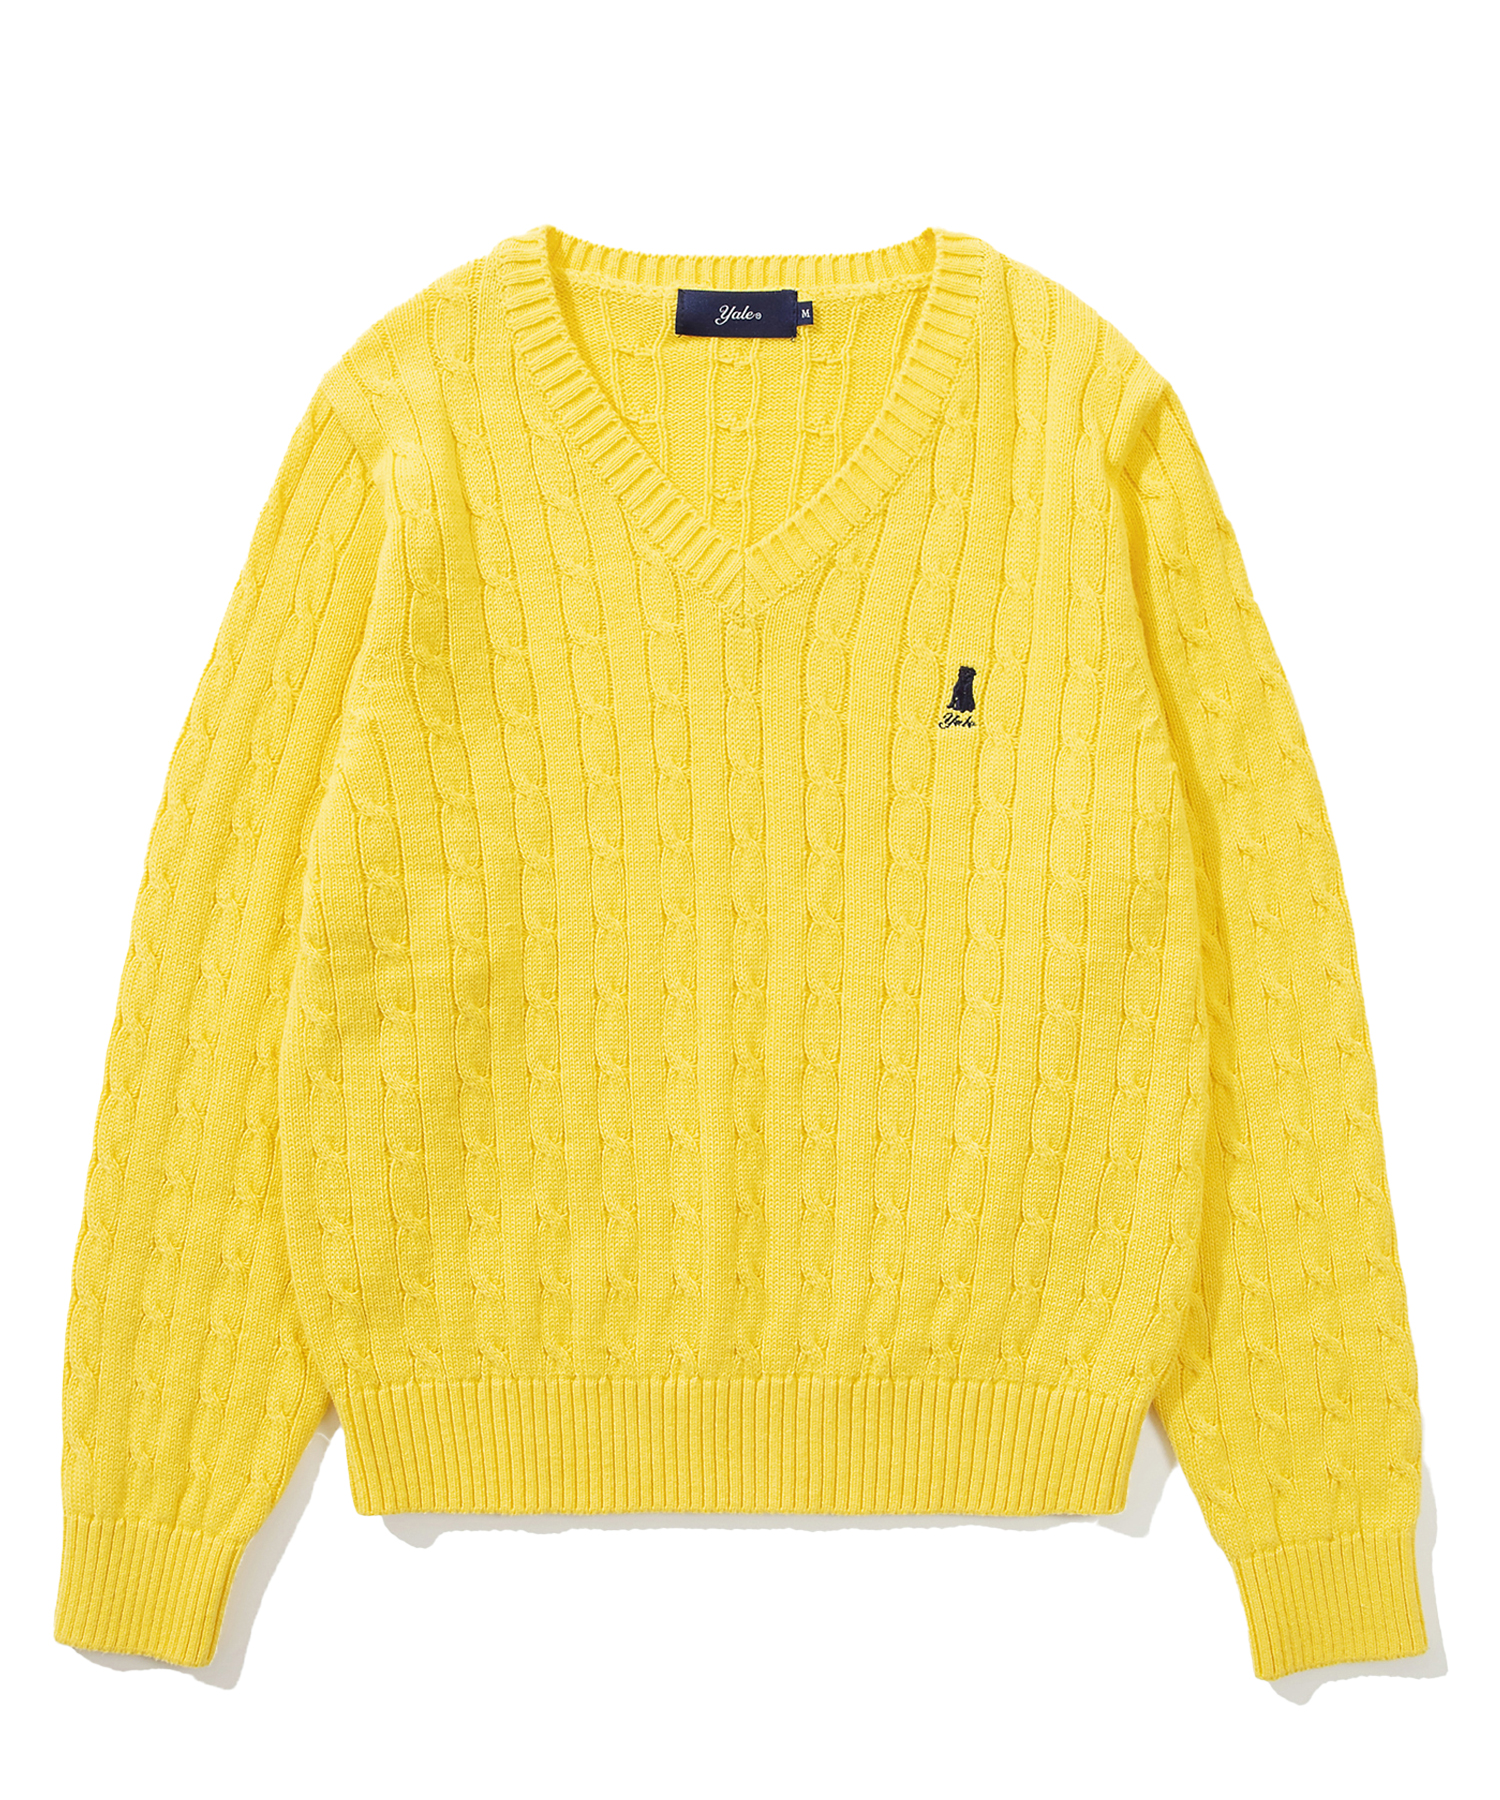 WOMENS HERITAGE UNIVERSITY DAN V NECK CABLE KNIT YELLOW